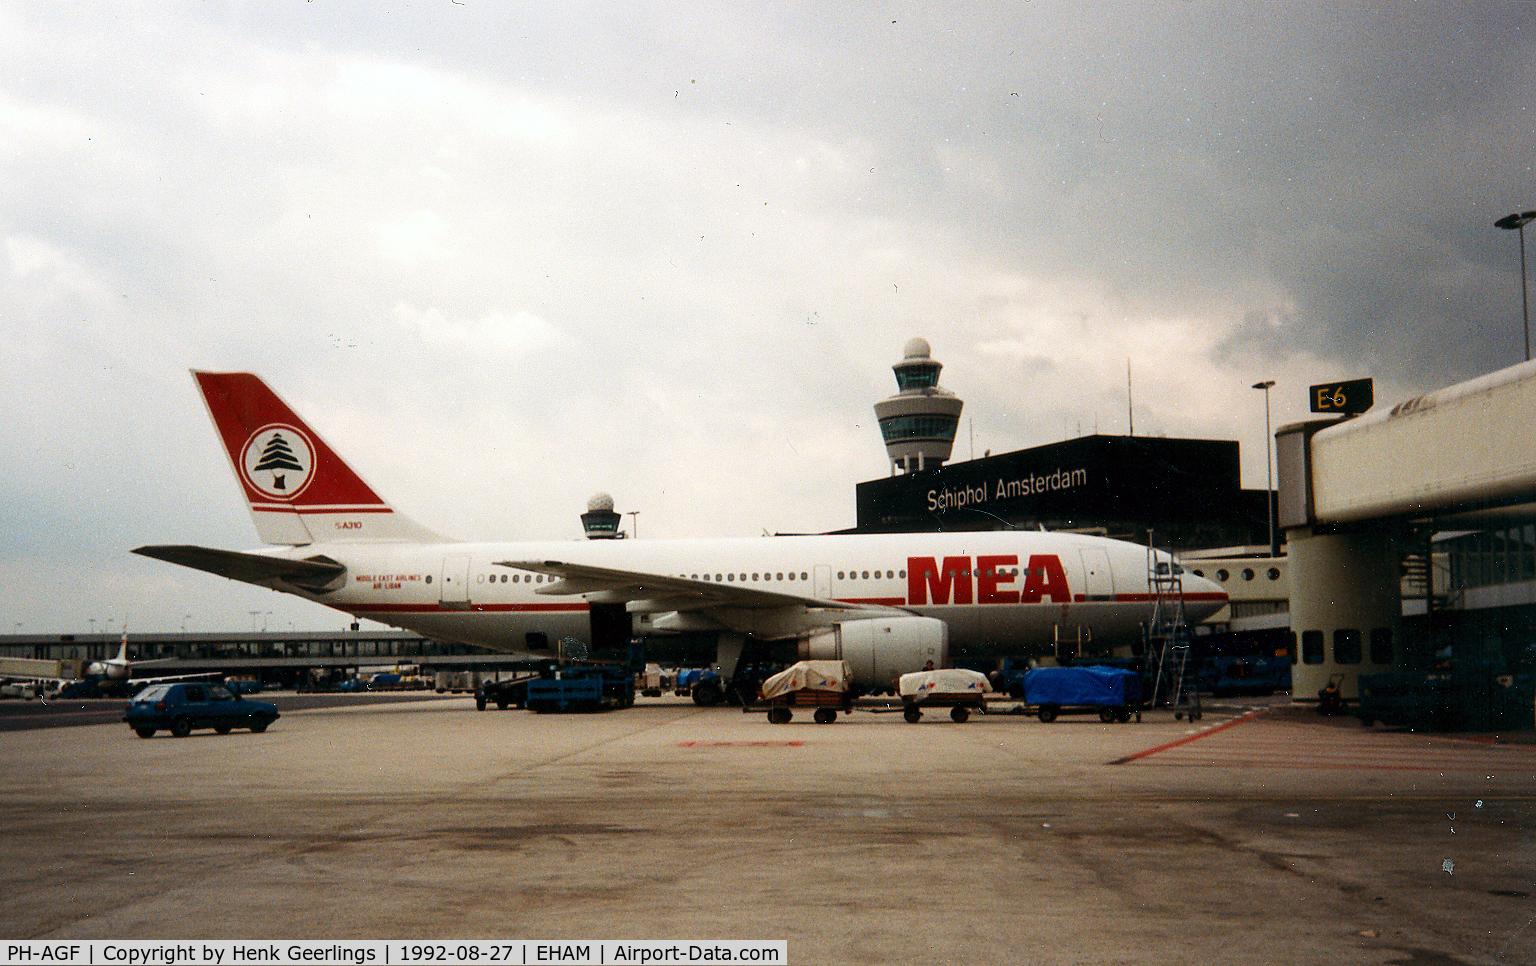 PH-AGF, 1984 Airbus A310-203 C/N 297, MEA , A310 lsd from KLM